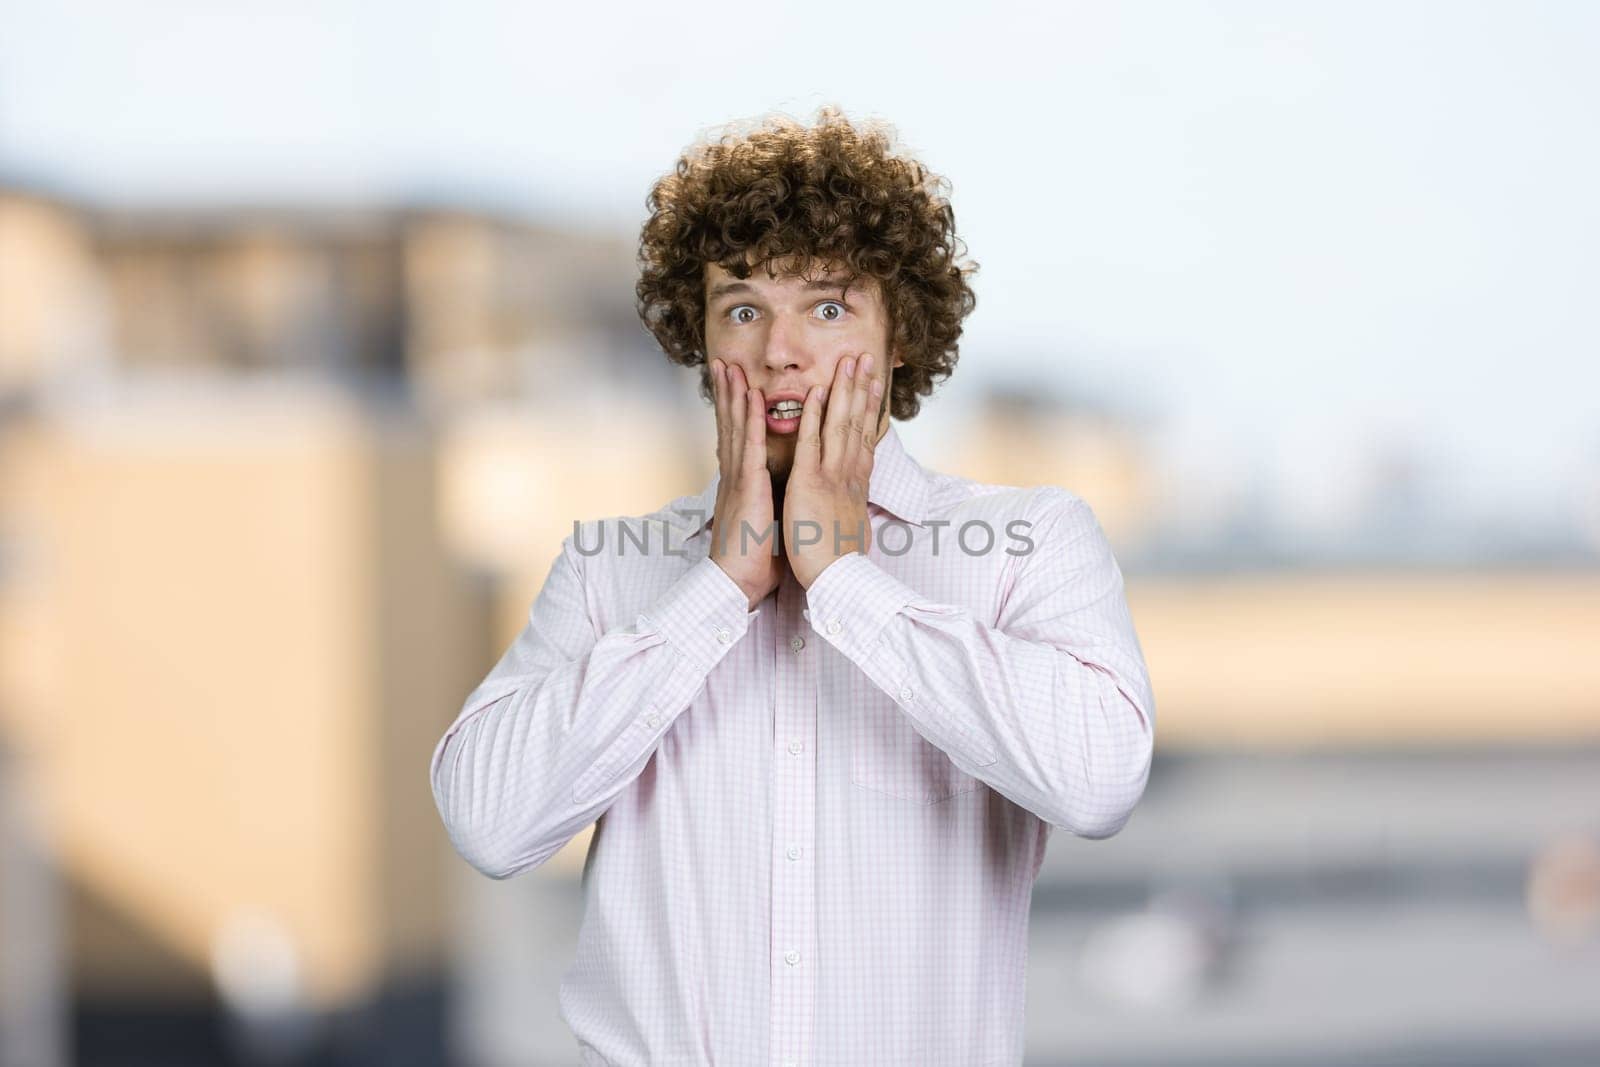 Portrait of shocked amazed young guy with curly hair touching his face. Blurred urban background.